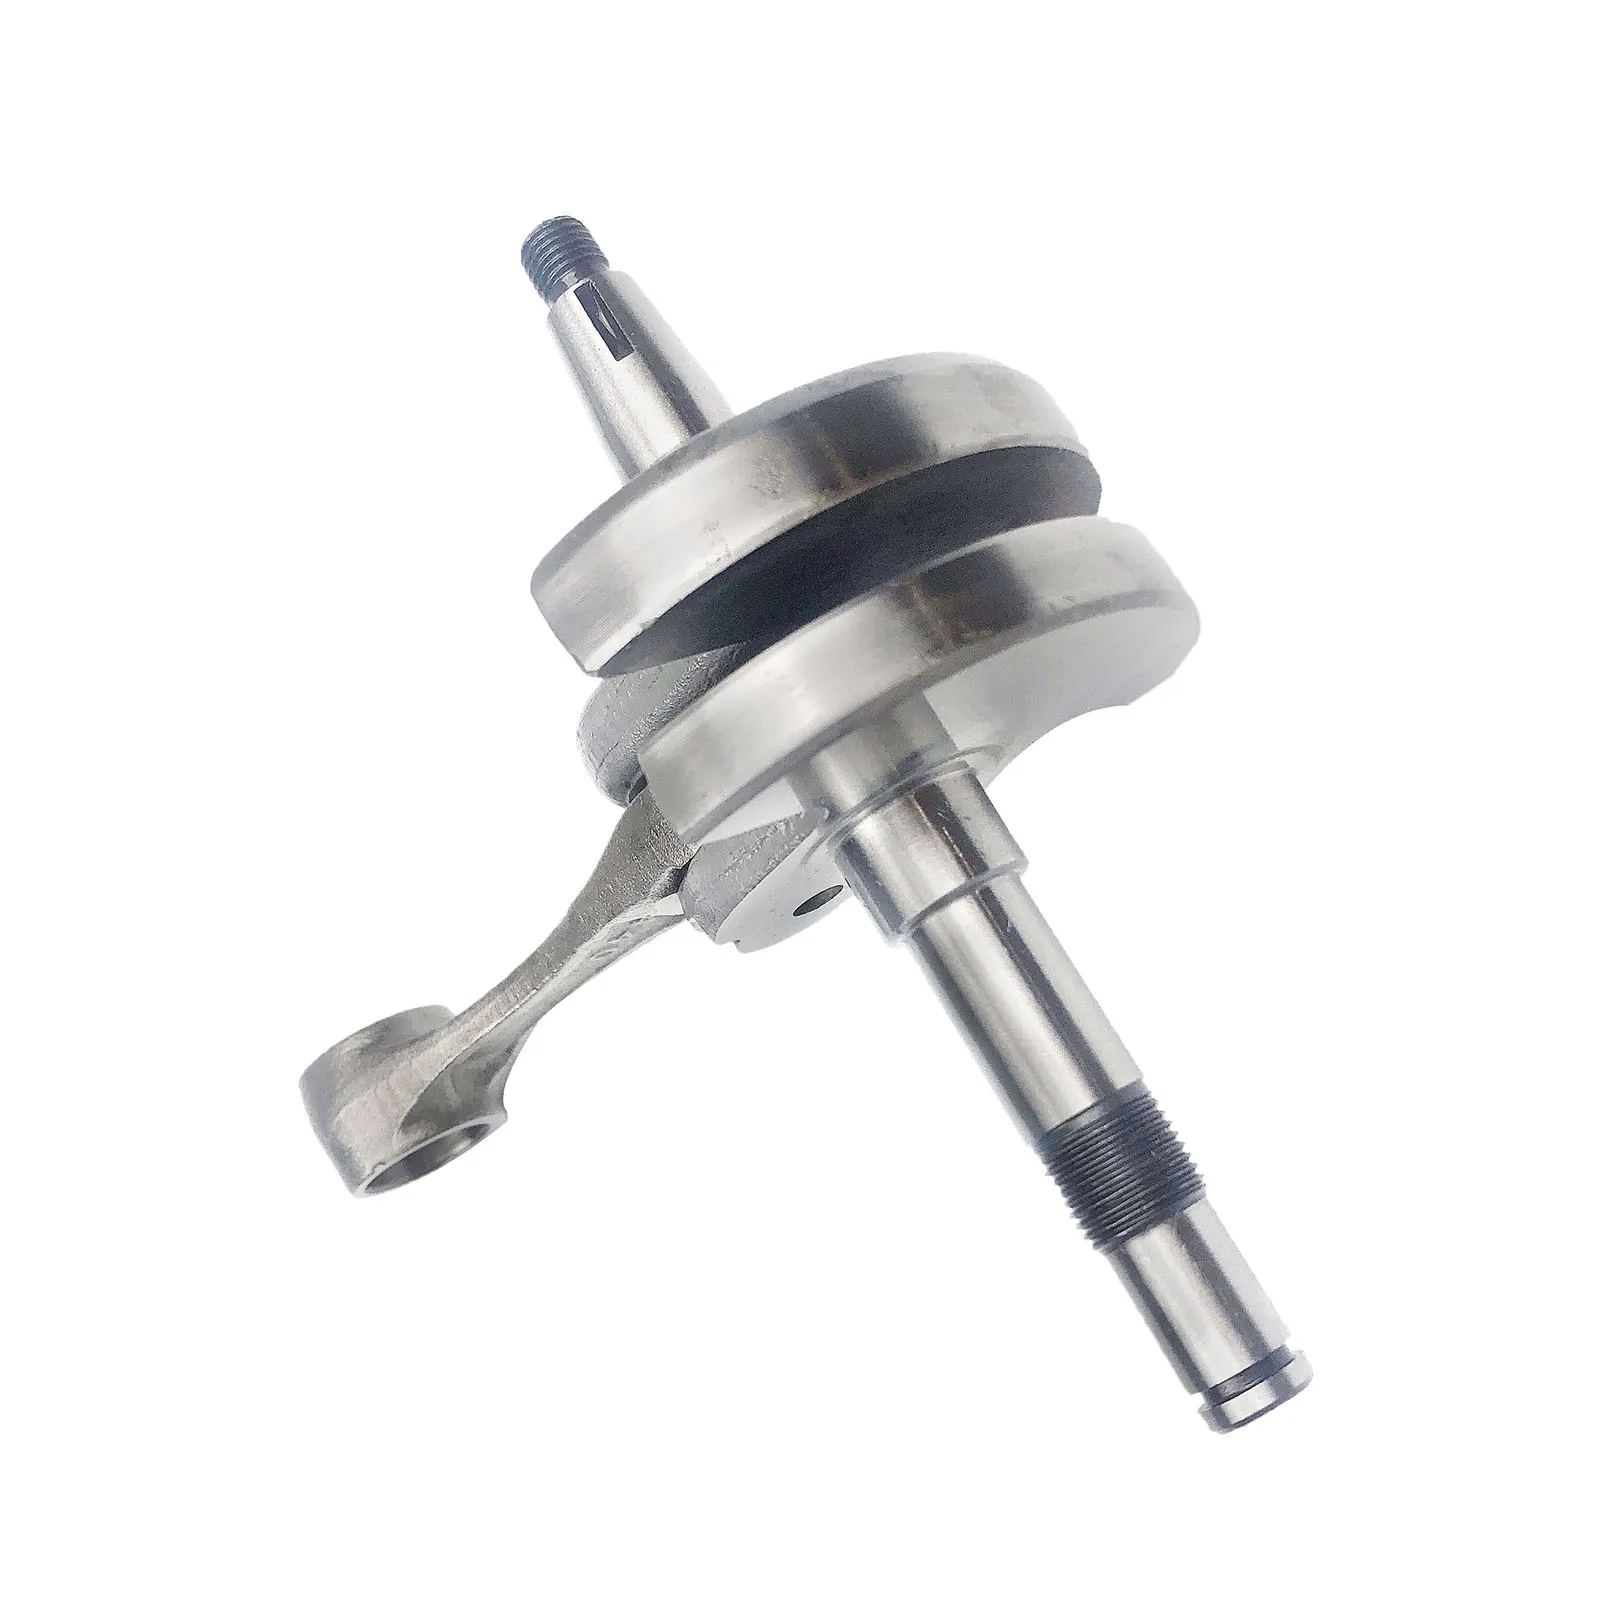 DRELD Chainsaw Crank Crankshaft Fit For Stihl MS 044 440 MS440 Garden Tools Gas Chain Saw Spare Parts 1128 030 0406